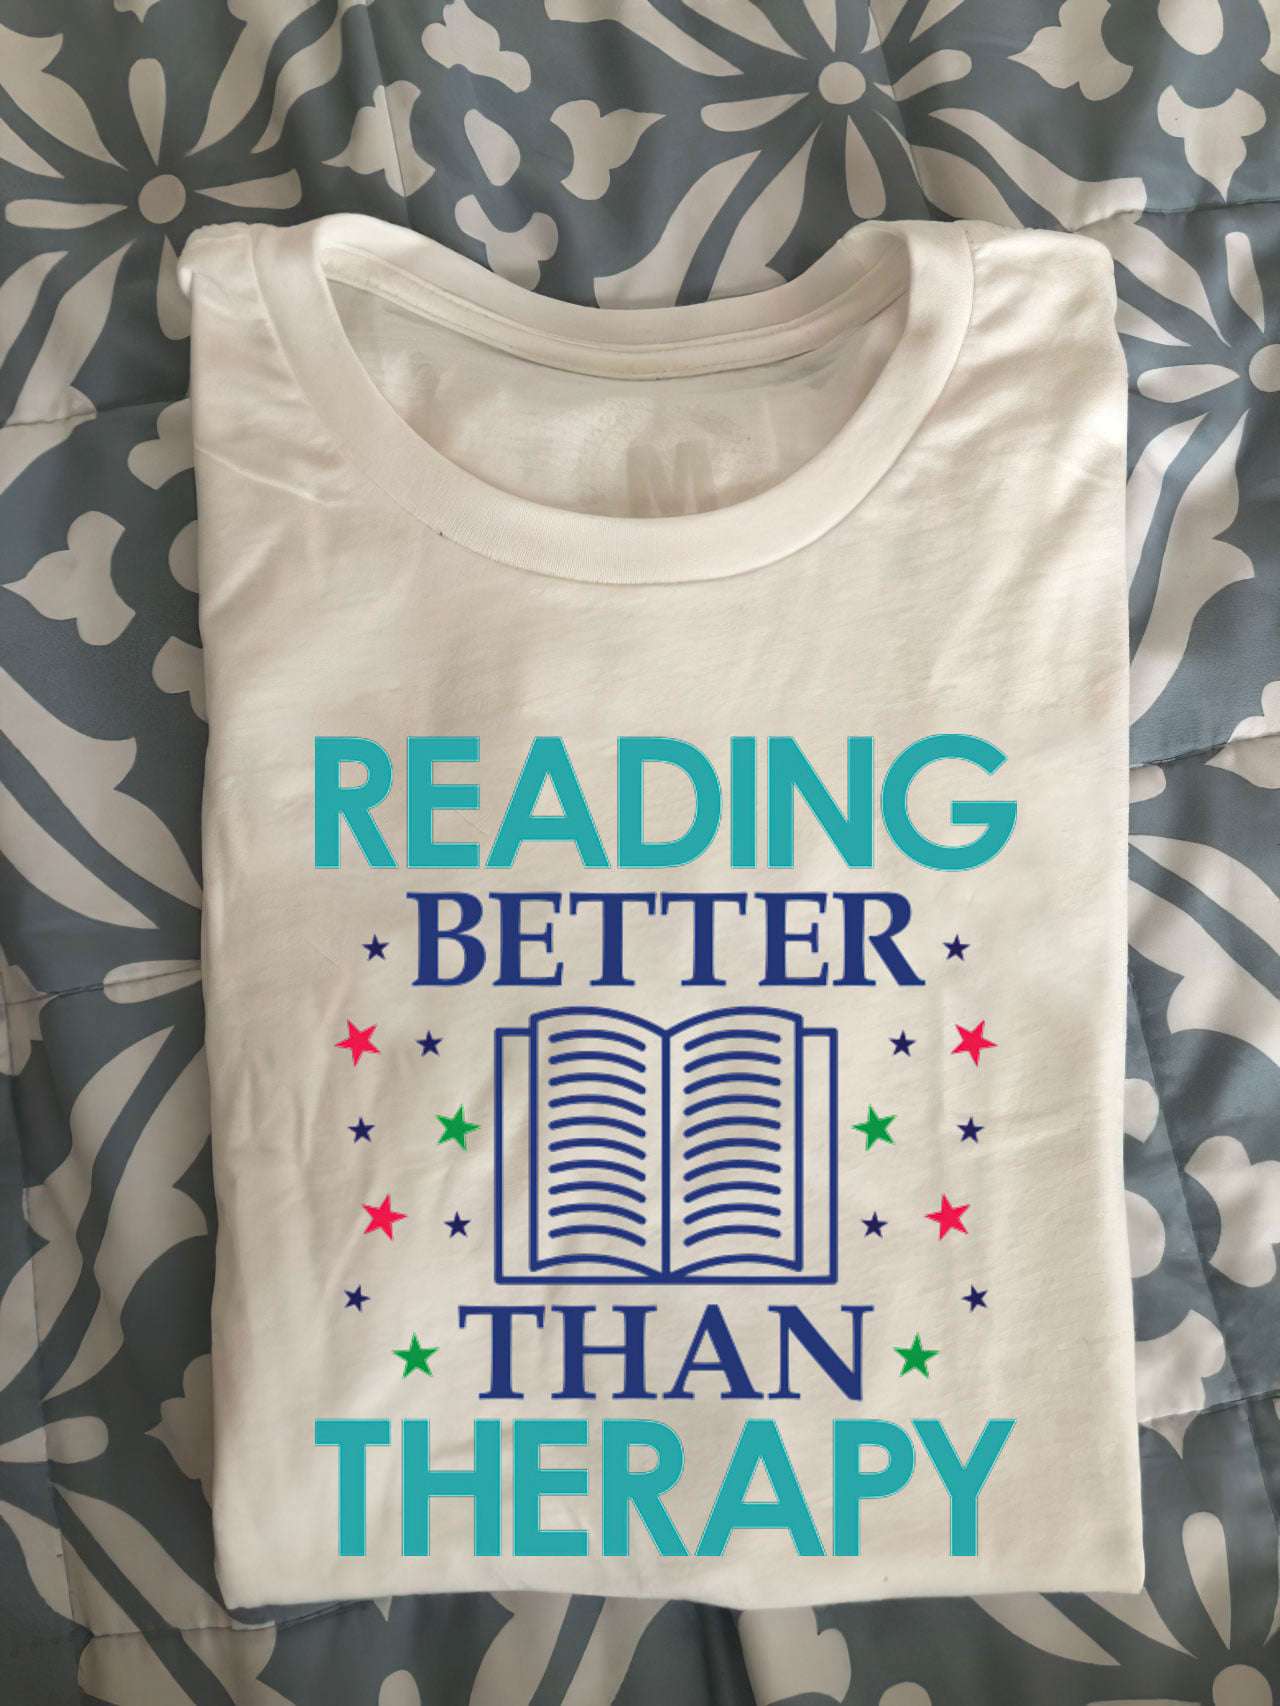 The Bookaholic - Reading better than therapy